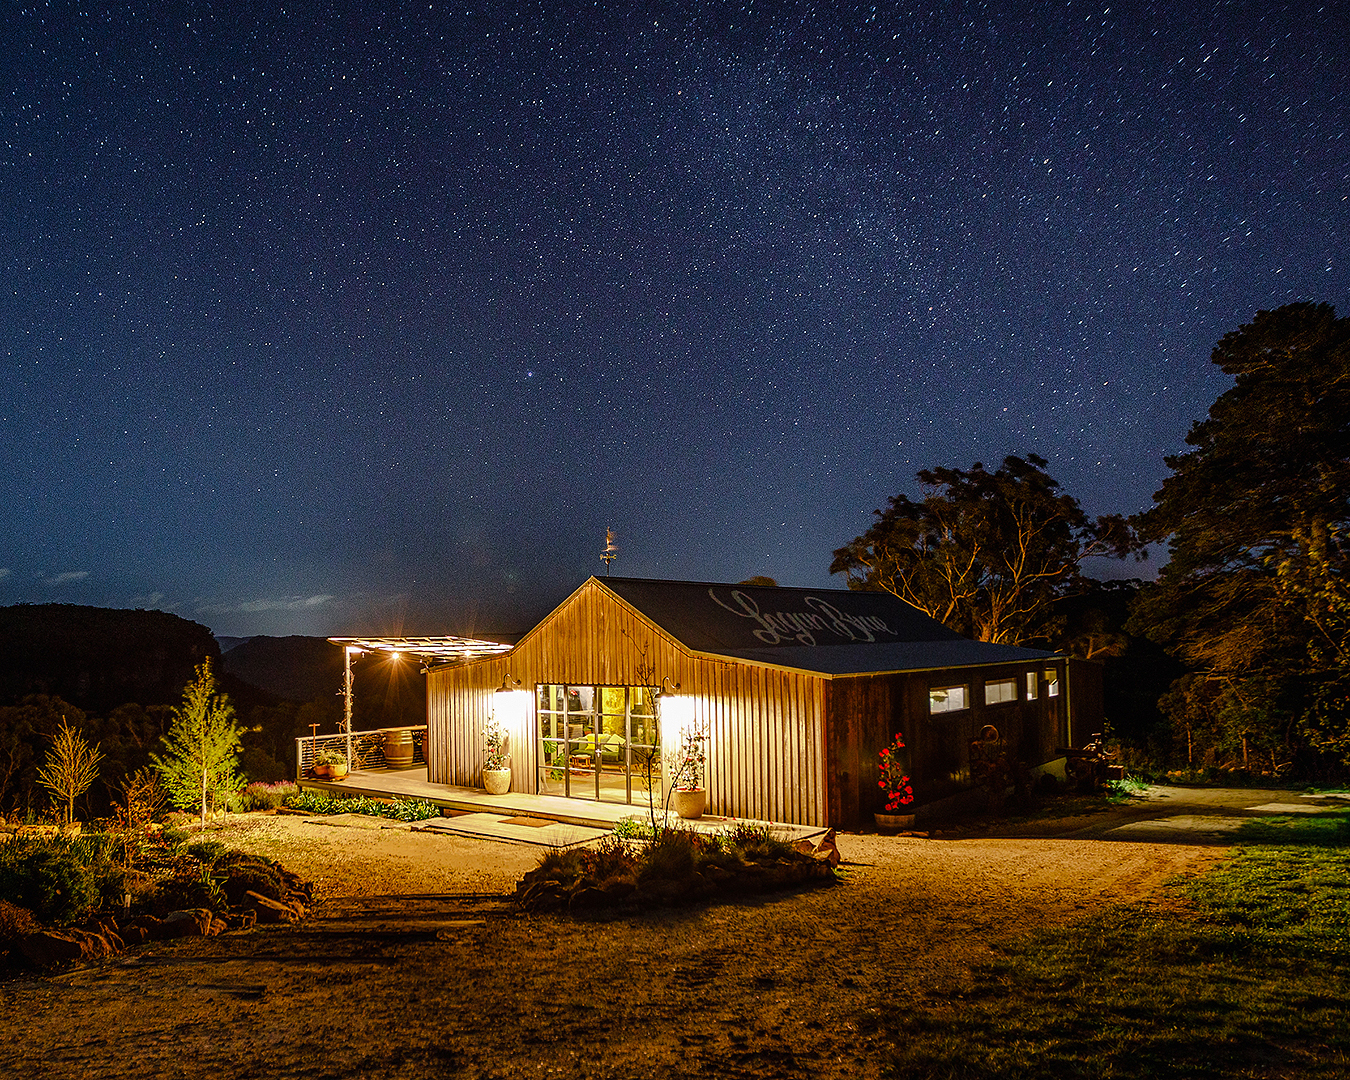 The Orchard Escape under a starry sky.